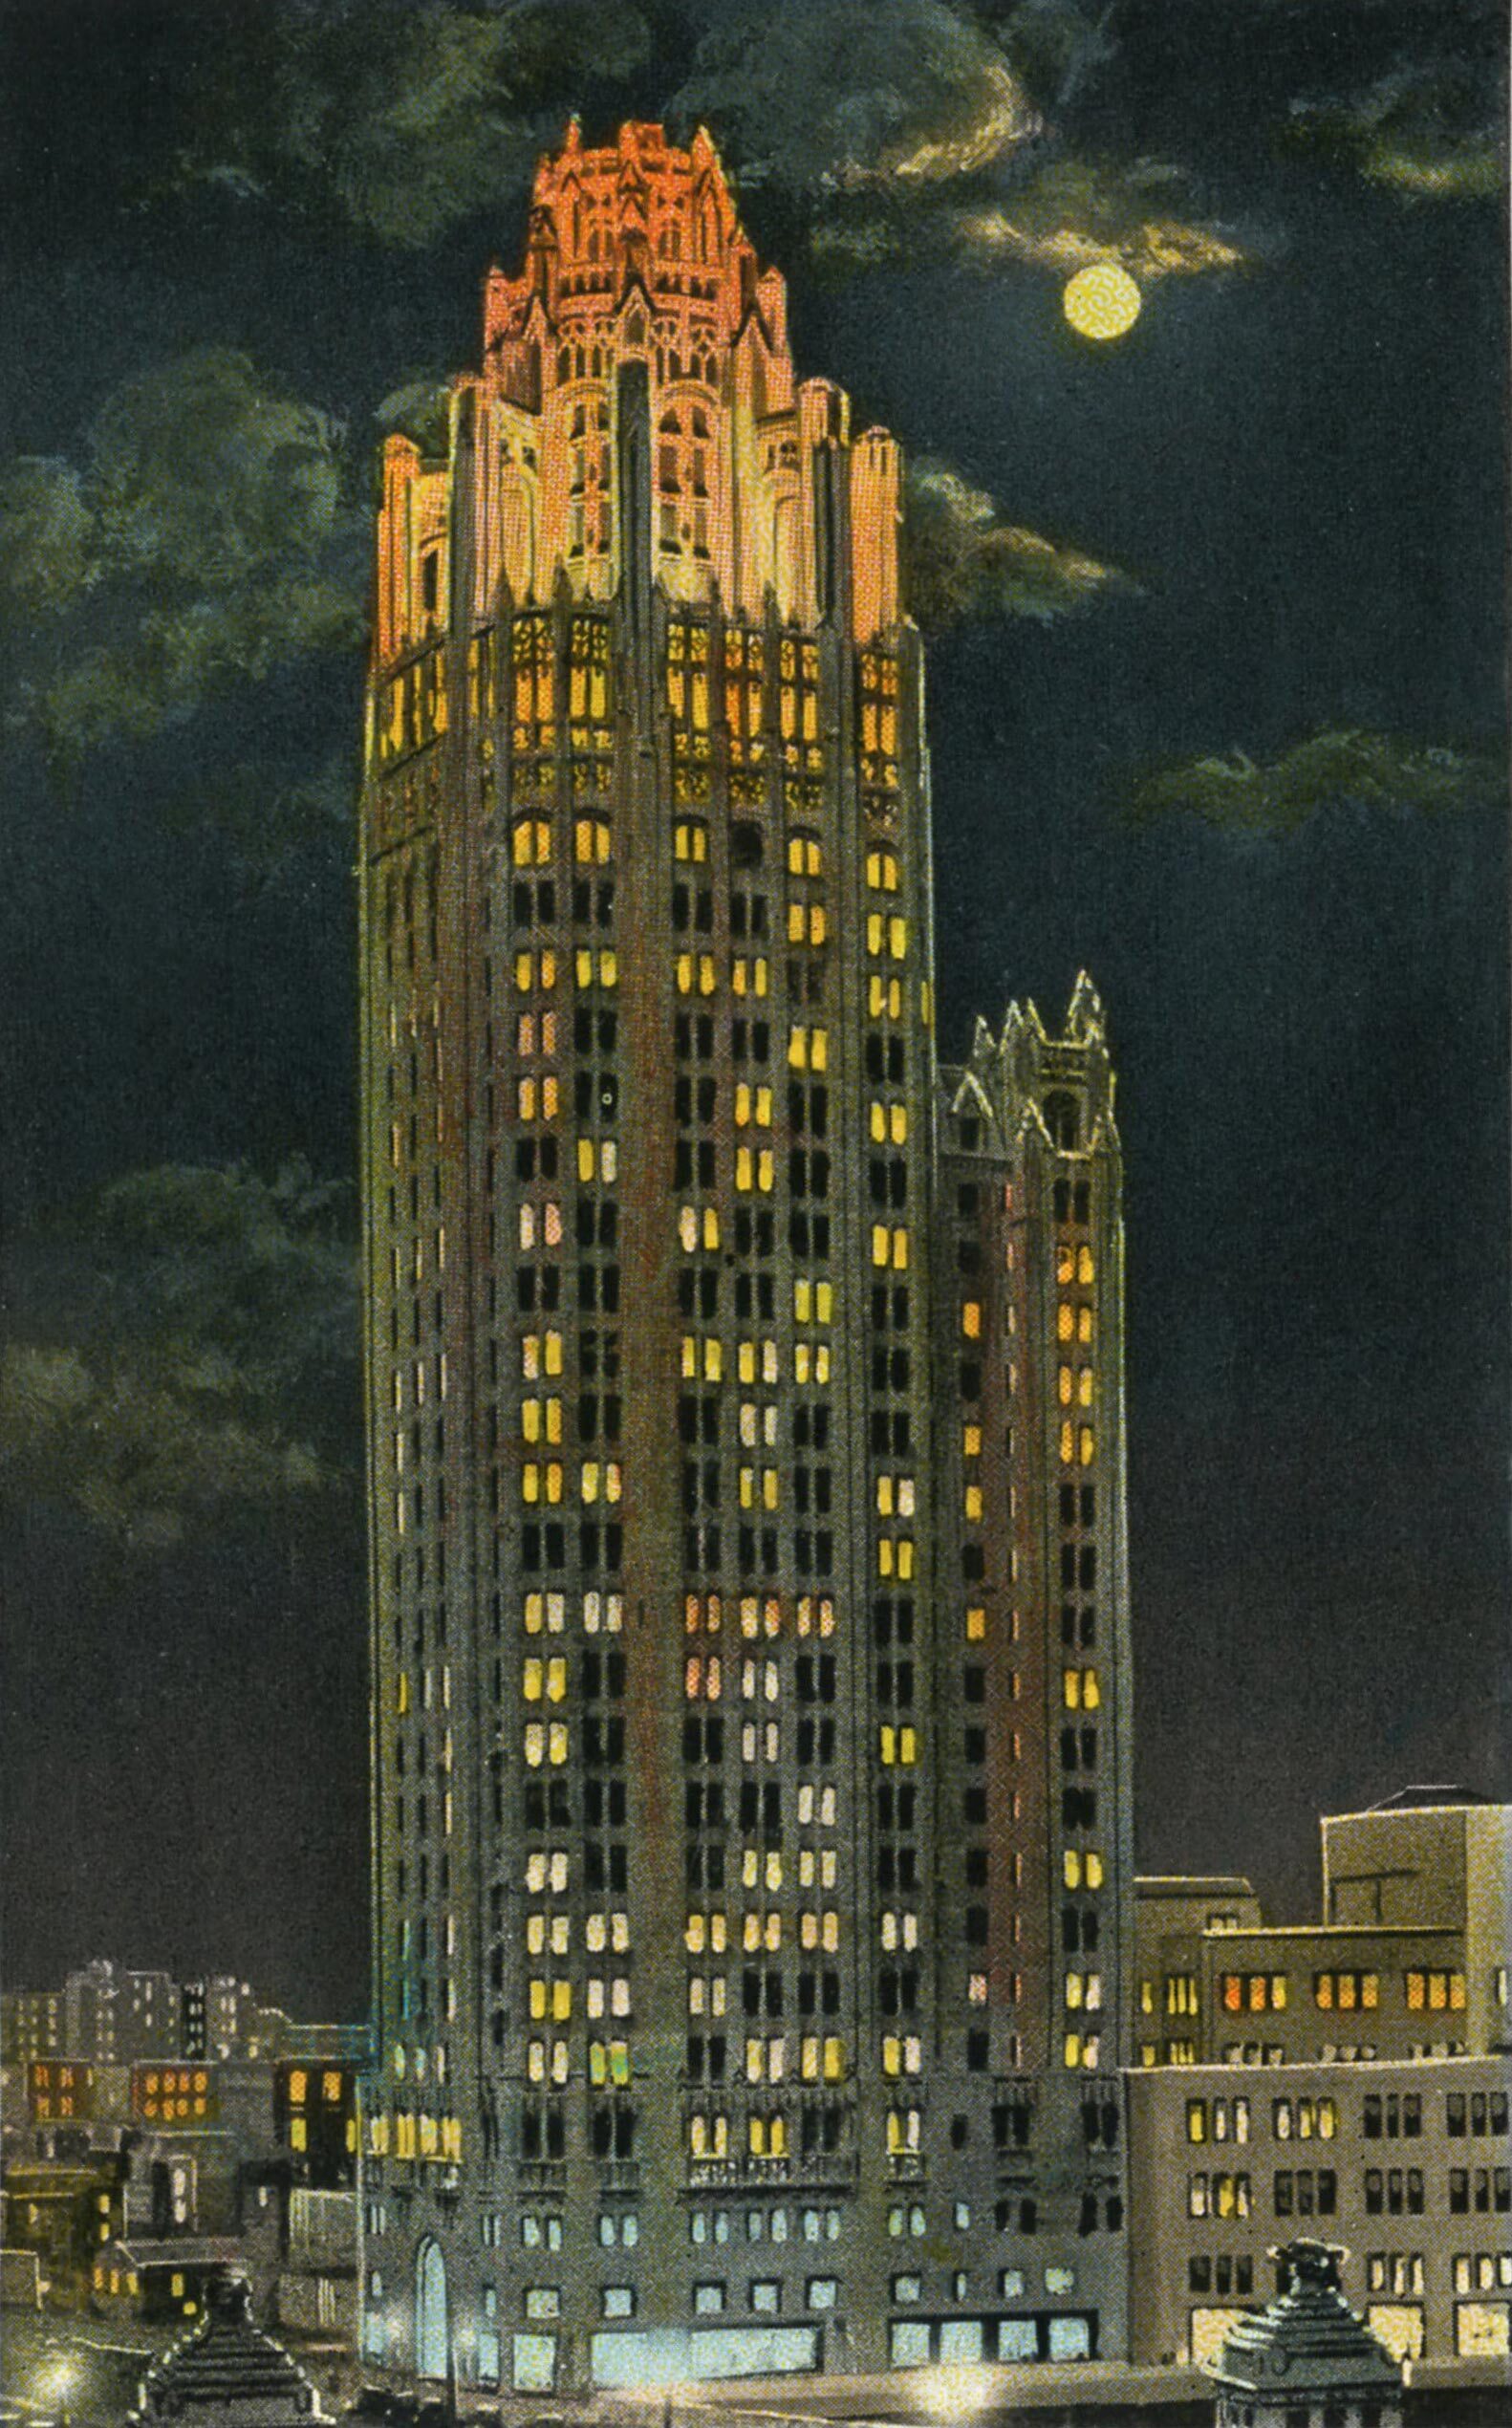 A color image of the Chicago Tribune Tower at night. A random pattern of the rectangular windows are illuminated from within and appear white and yellow in color. The uppermost portion of the building, the crown of gothic ornament and buttresses, is glowing in a bright red-orange color that stands out from the rest of the building. A glowing yellow full moon in the background illuminates scattered clouds.